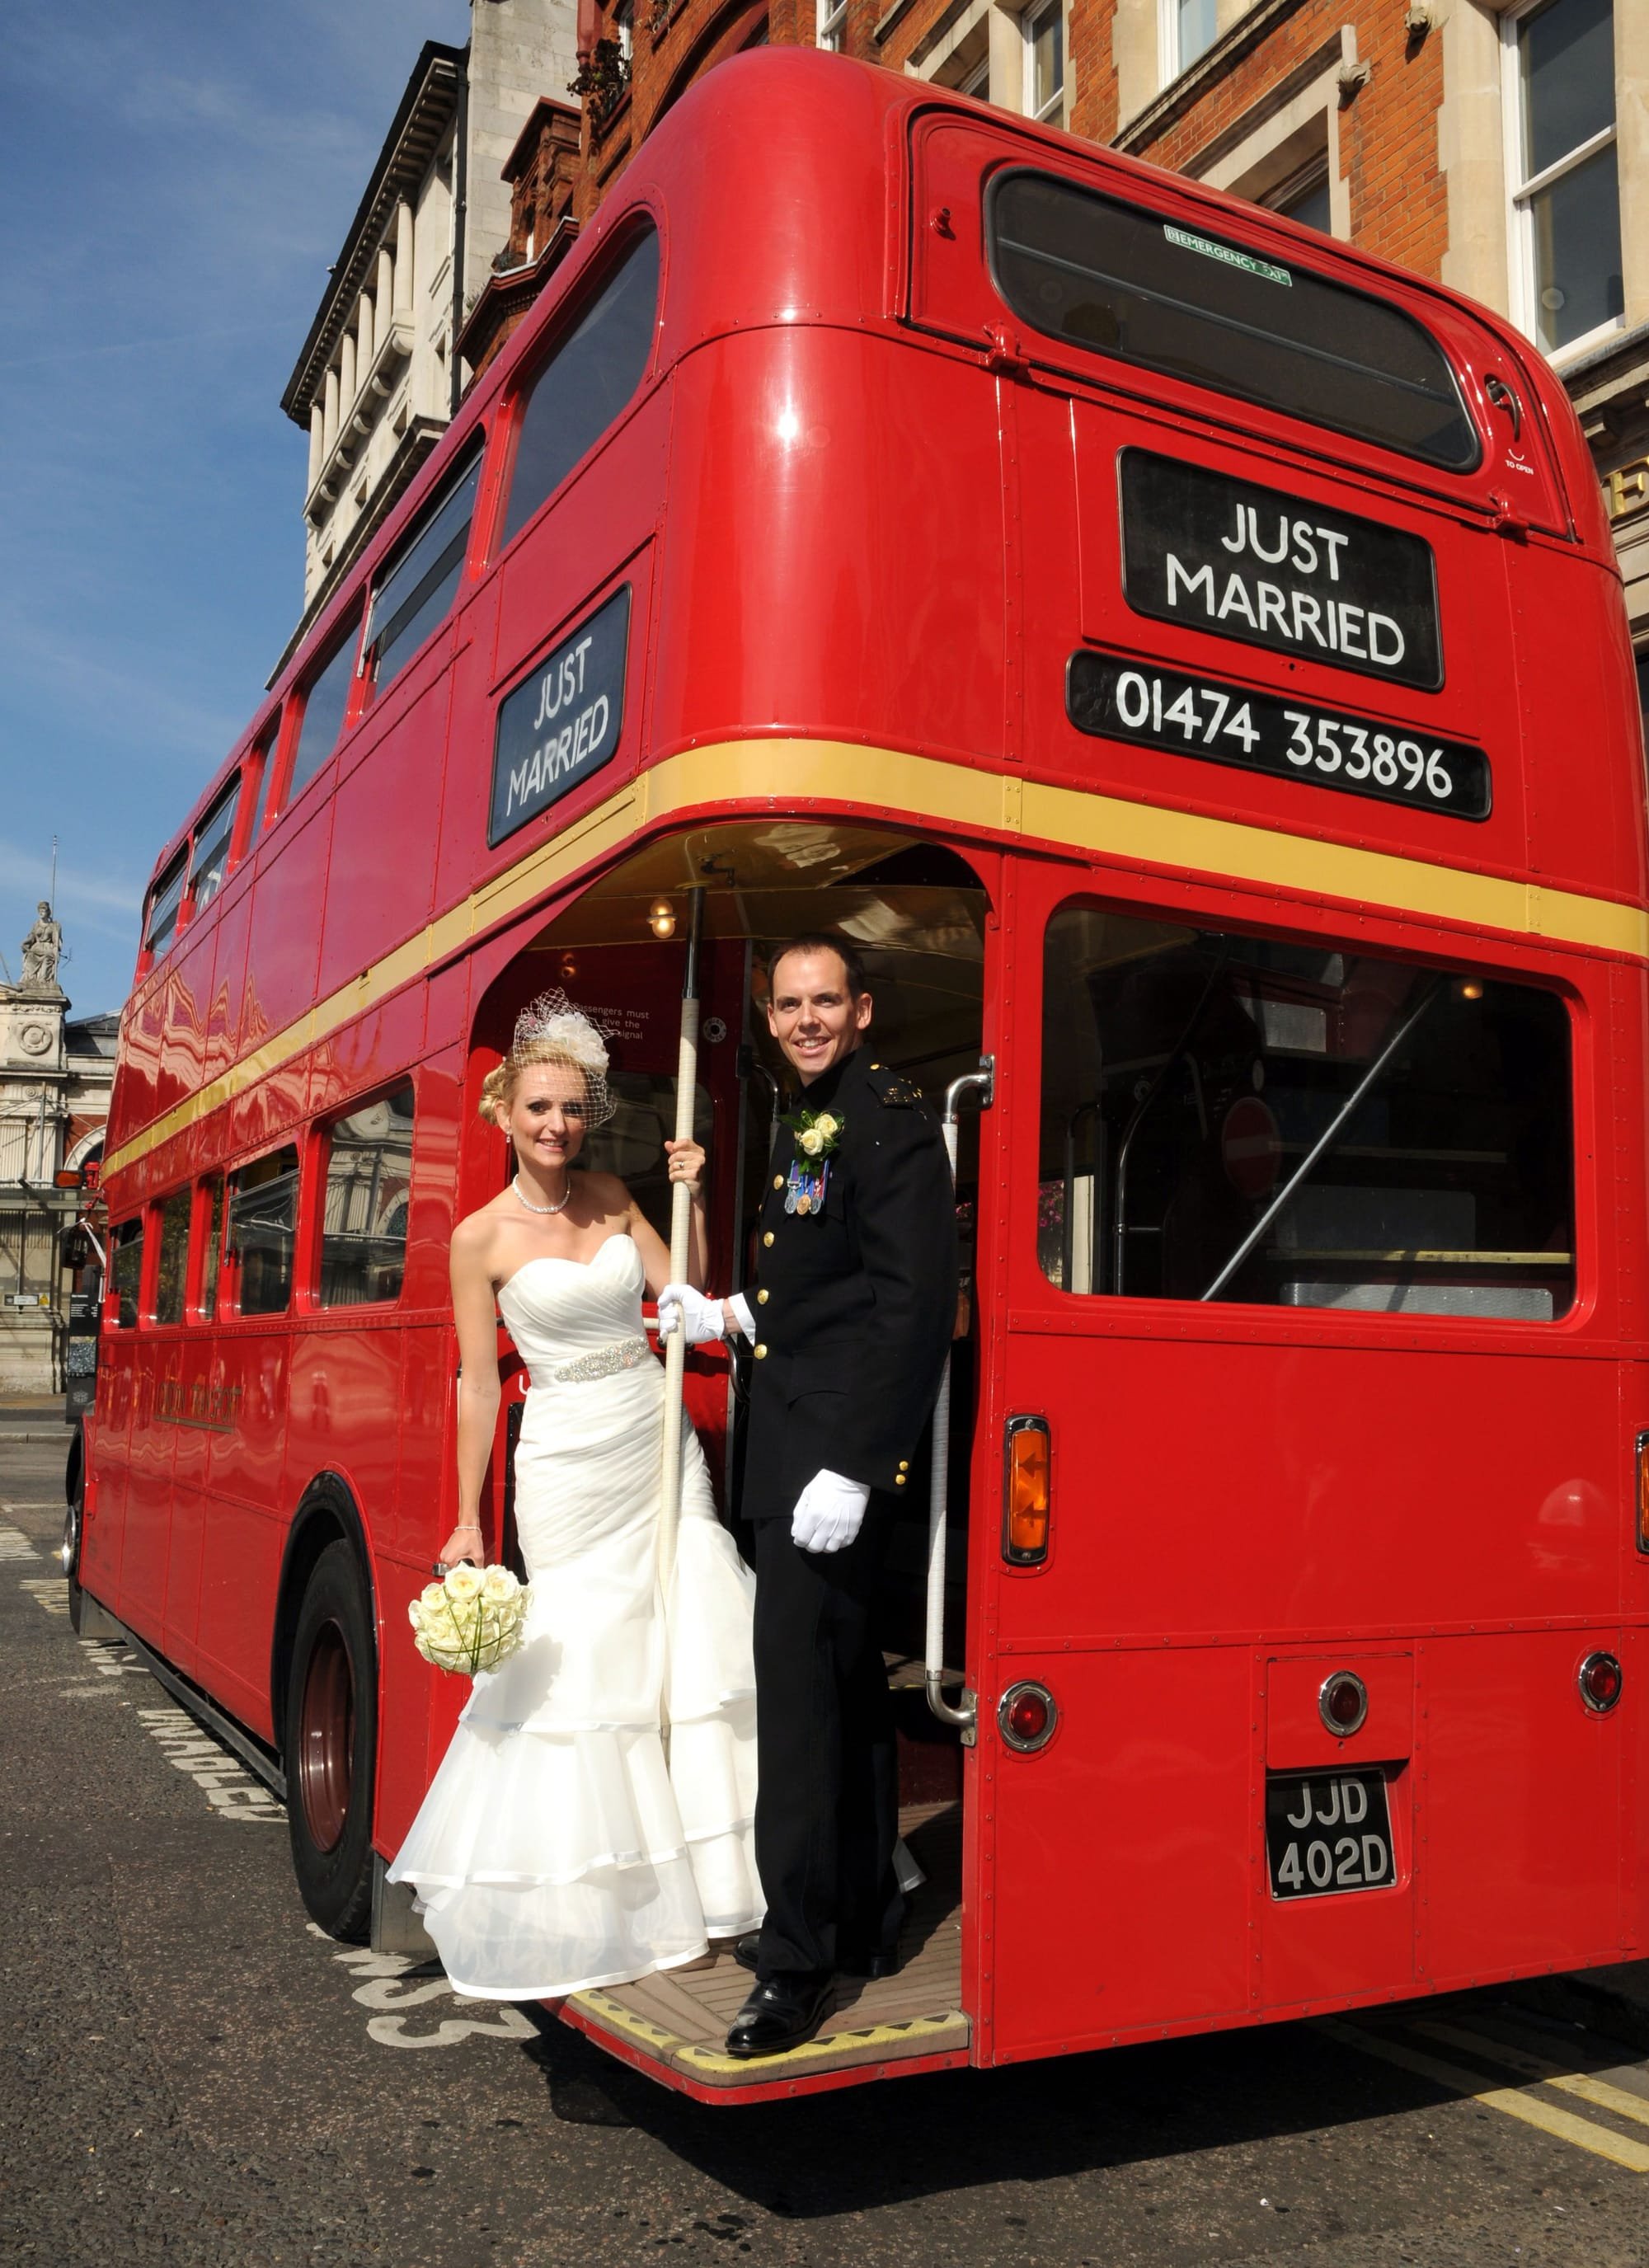 Married Couple with Wedding Bus